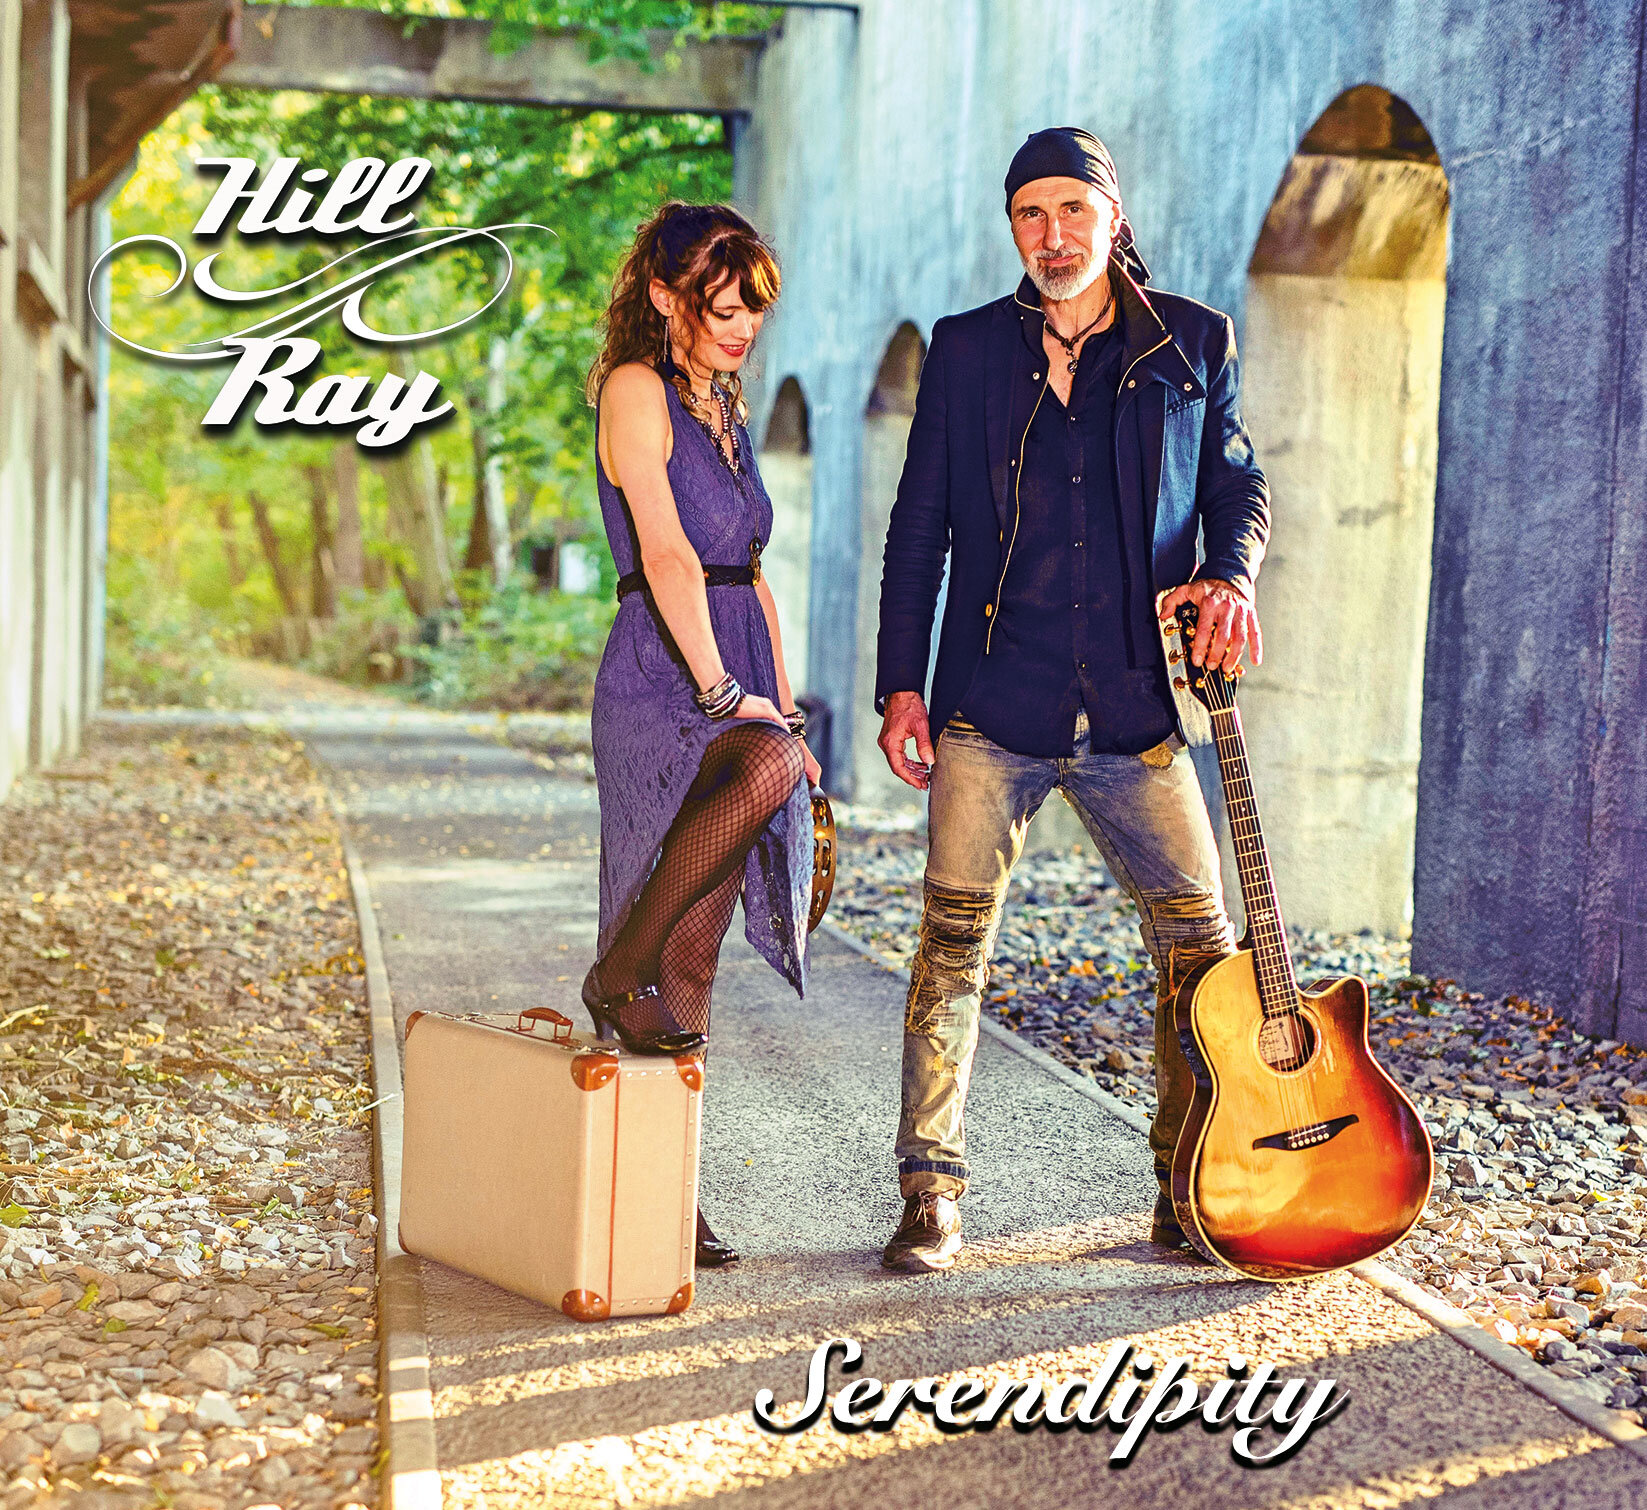 Rocktimes Review "Serendipity"